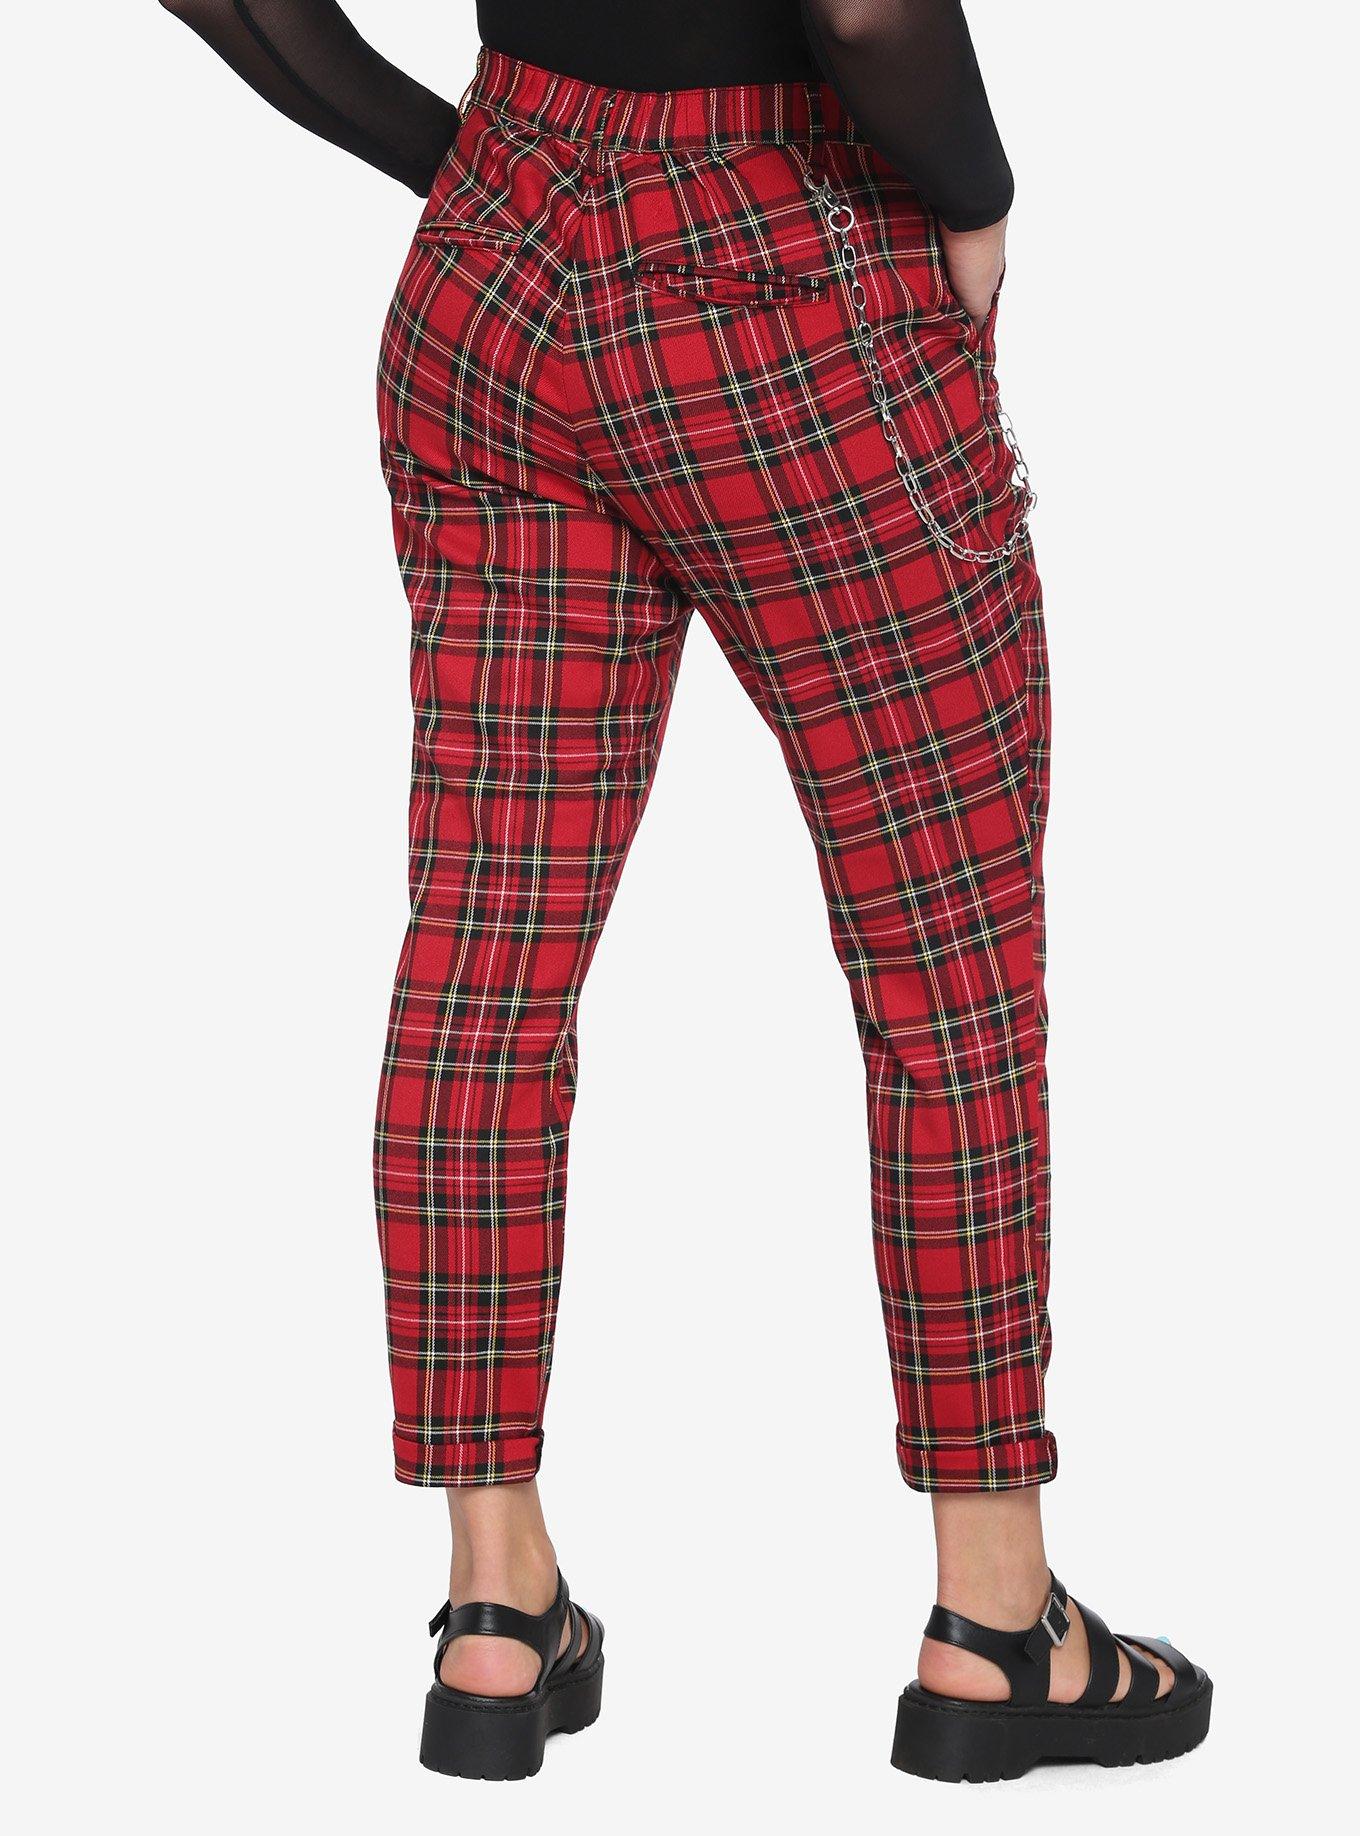 Hot Topic Plaid Pants With Chain Black Size XXL - $15 (55% Off